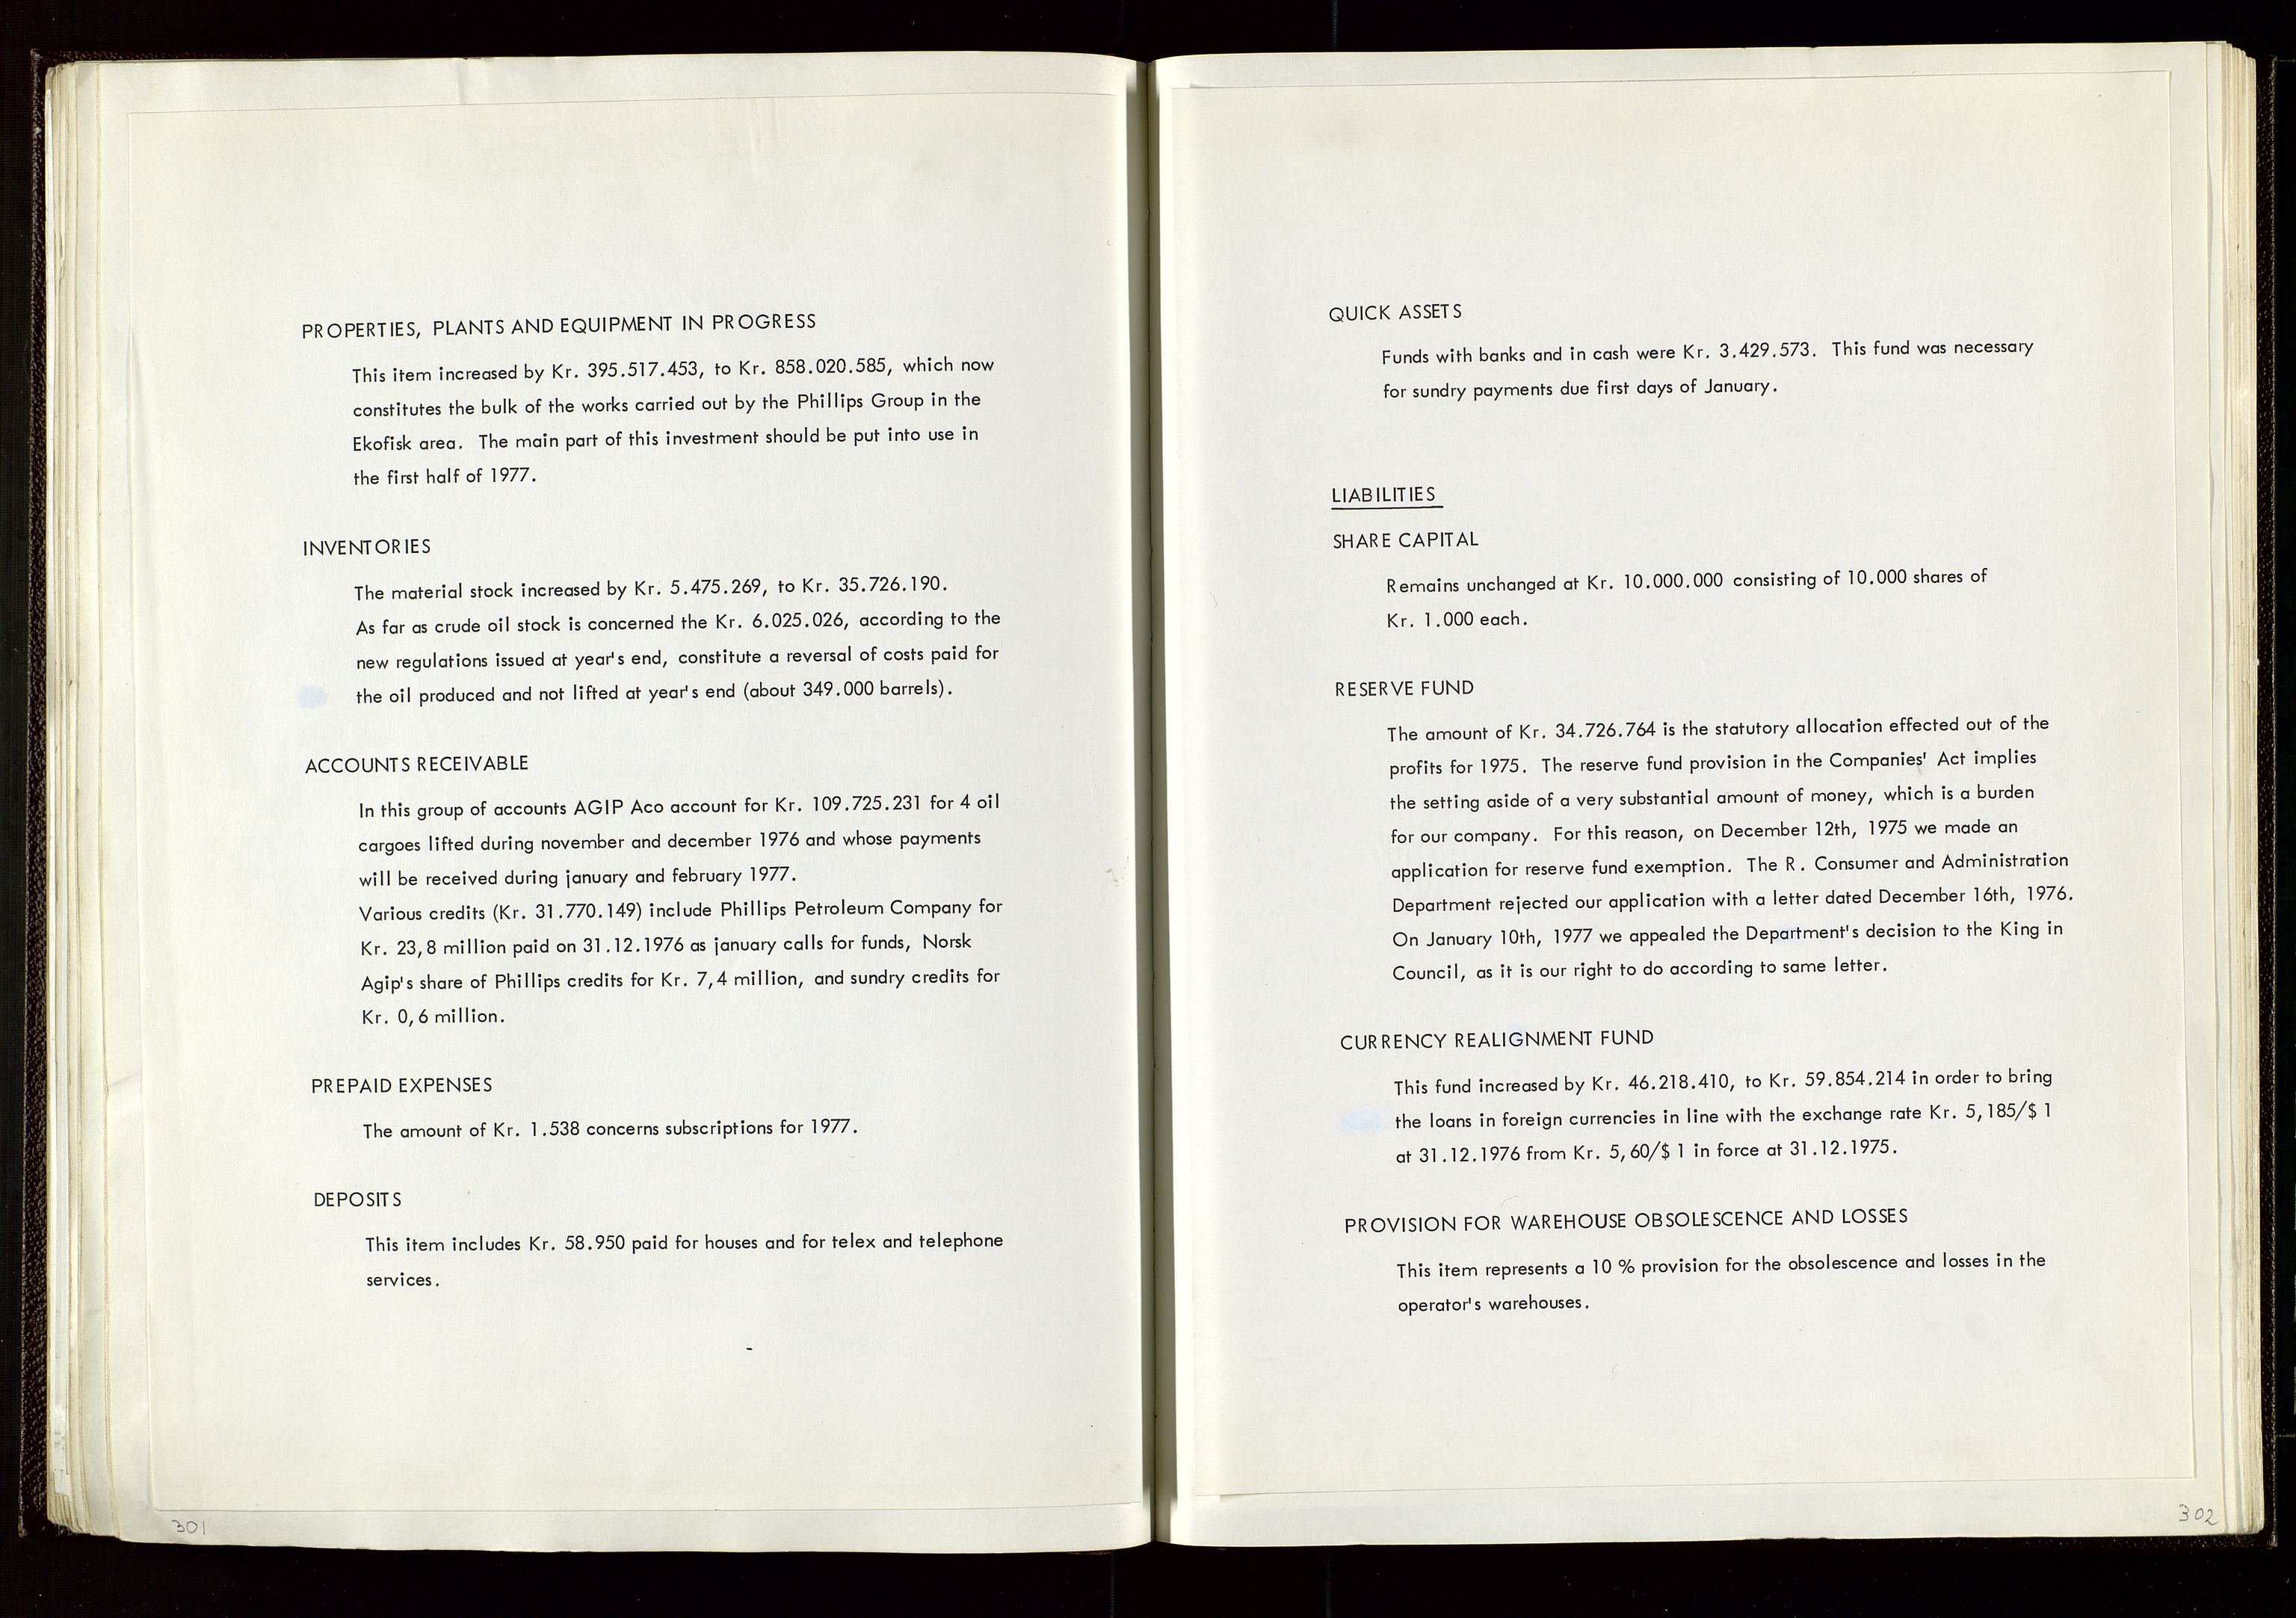 Pa 1583 - Norsk Agip AS, SAST/A-102138/A/Aa/L0002: General assembly and Board of Directors meeting minutes, 1972-1979, s. 301-302